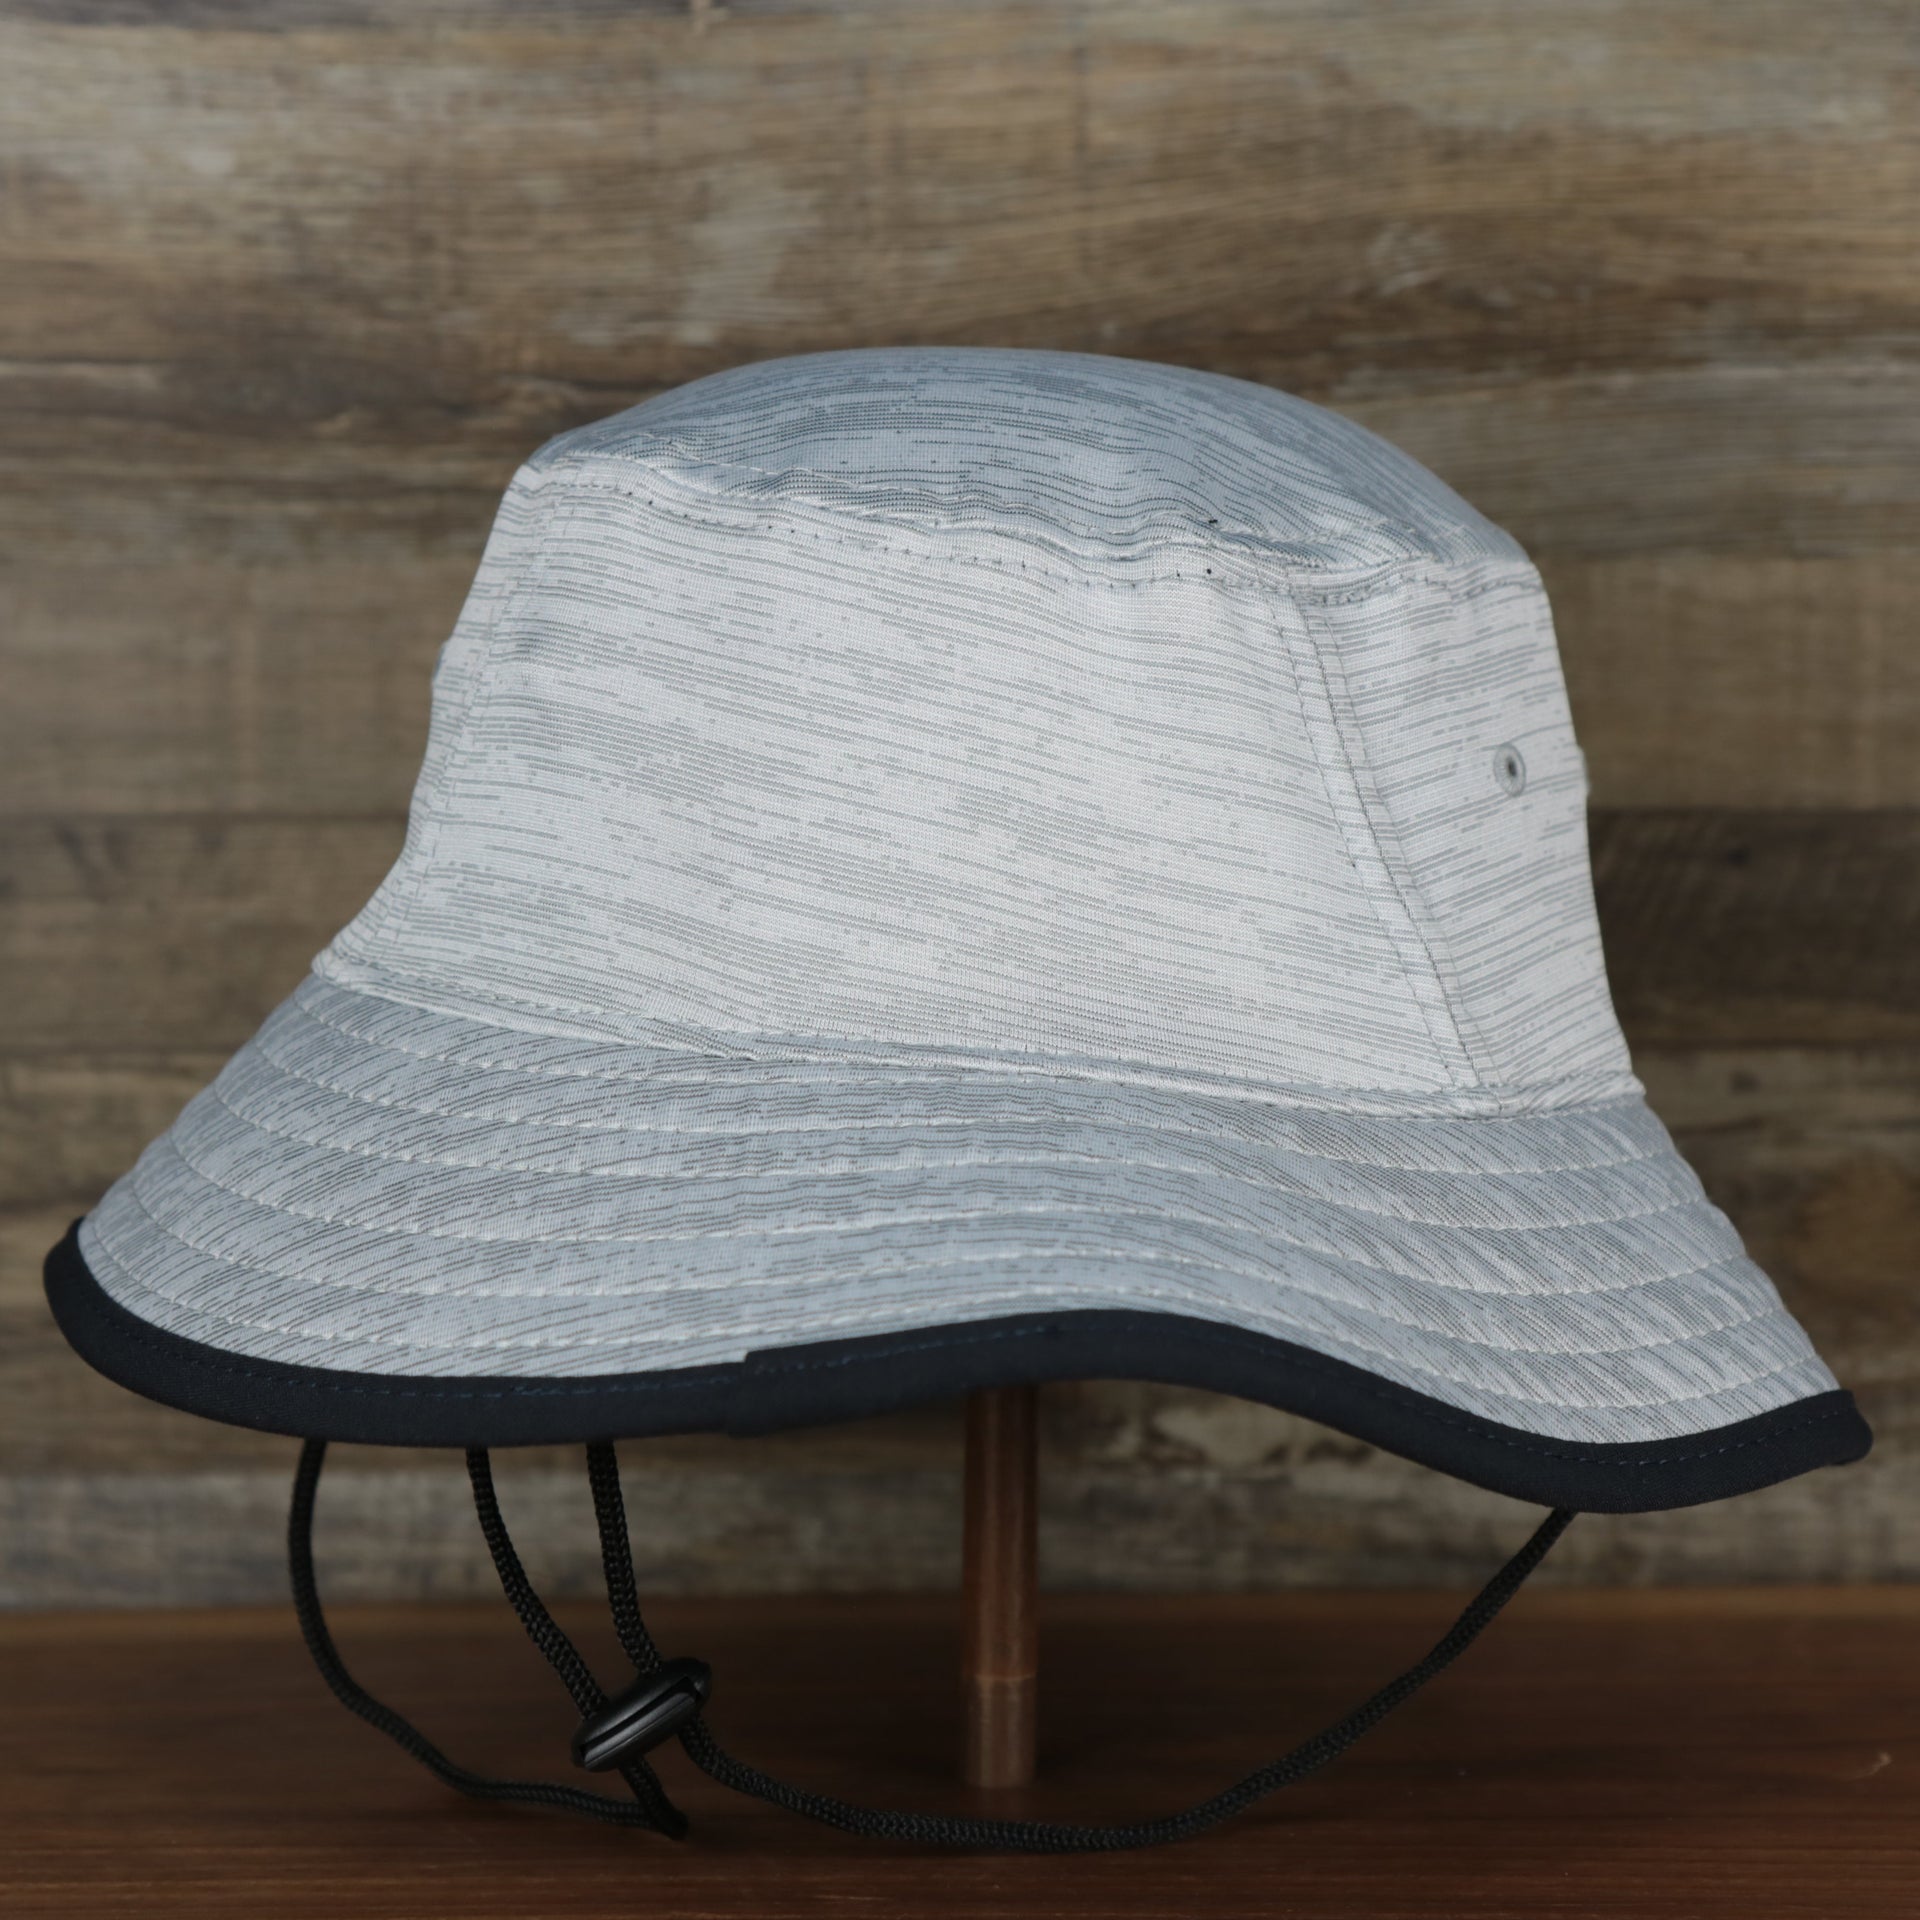 The backside of the New York Yankees New Era Bucket Hat